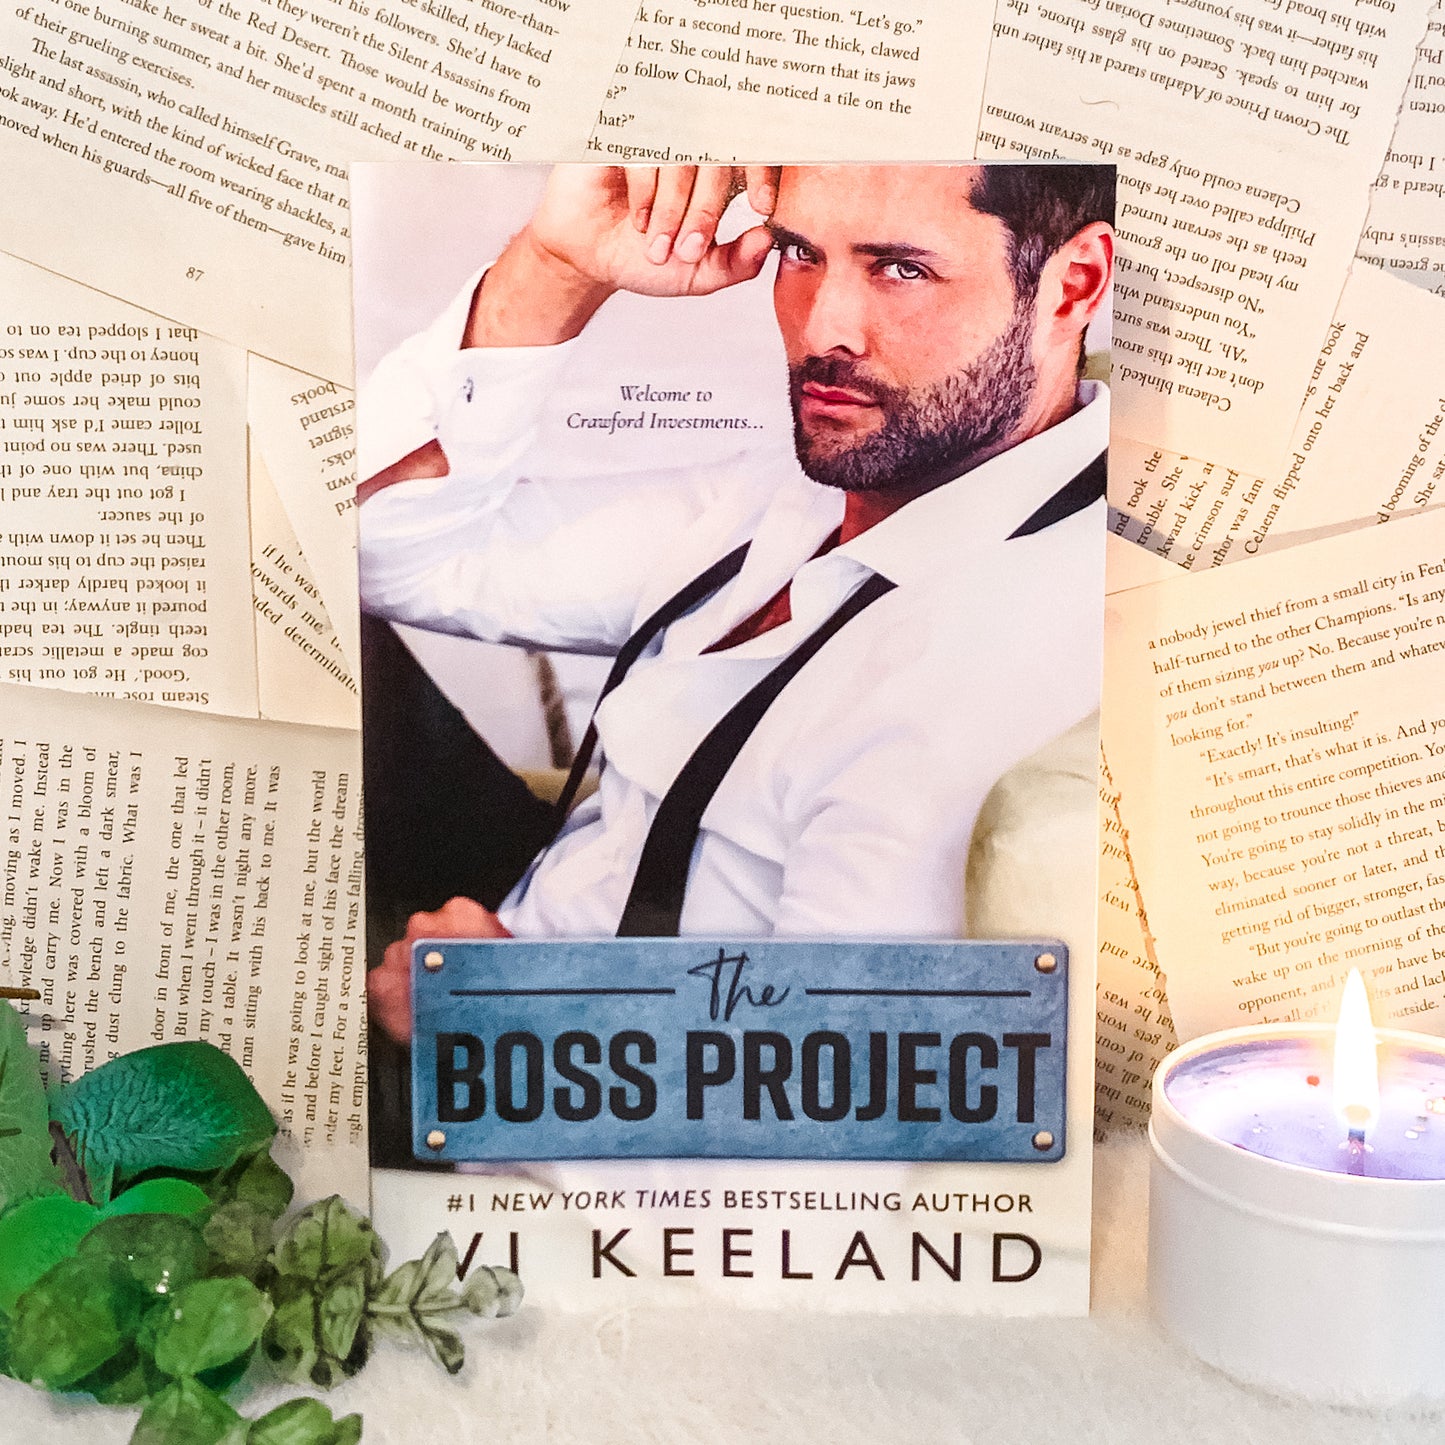 The Boss Project by Vi Keeland